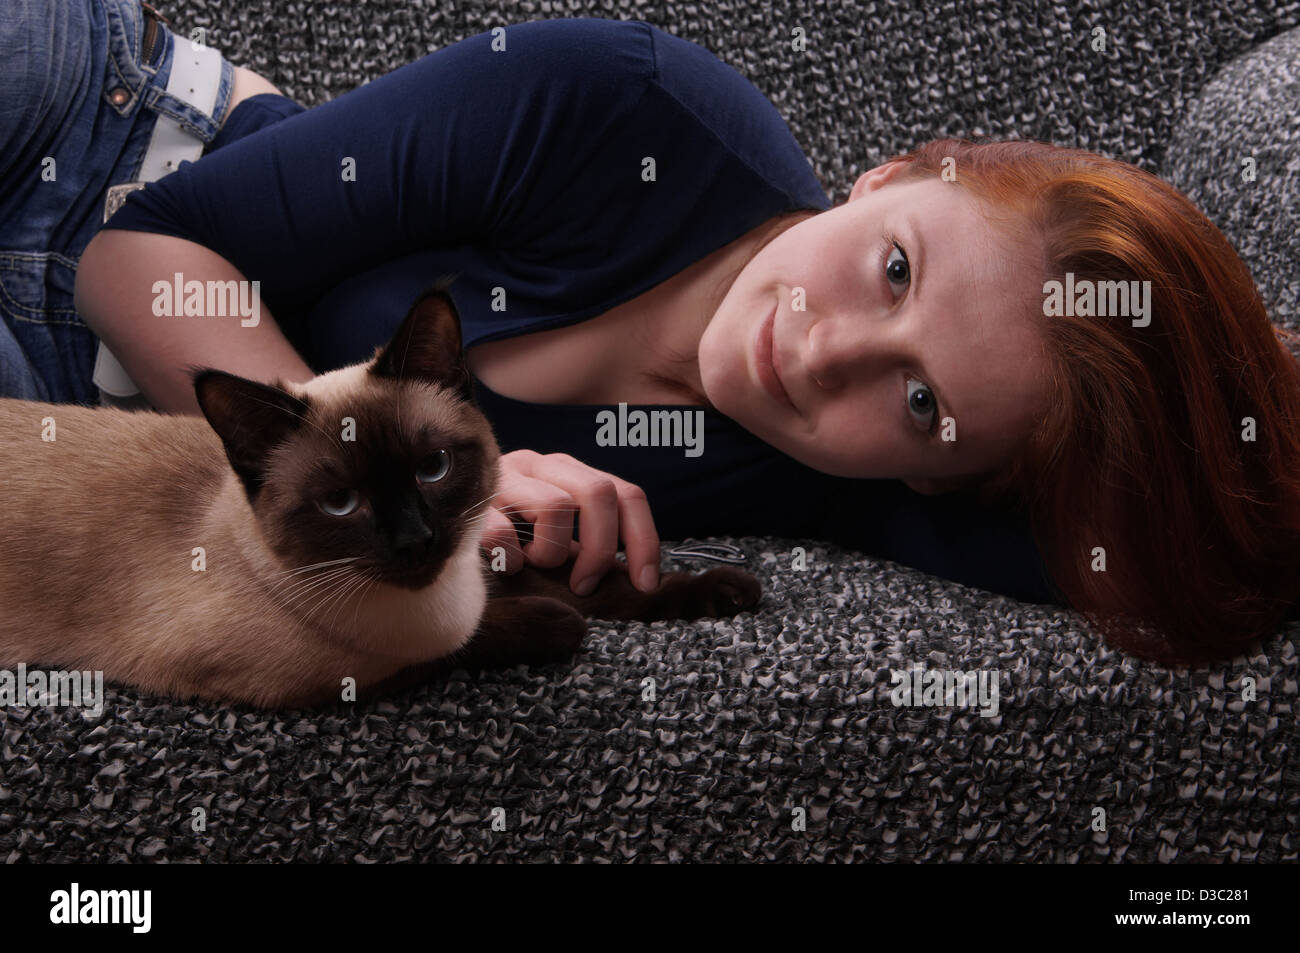 young woman and siamese cat lazing on couch Stock Photo